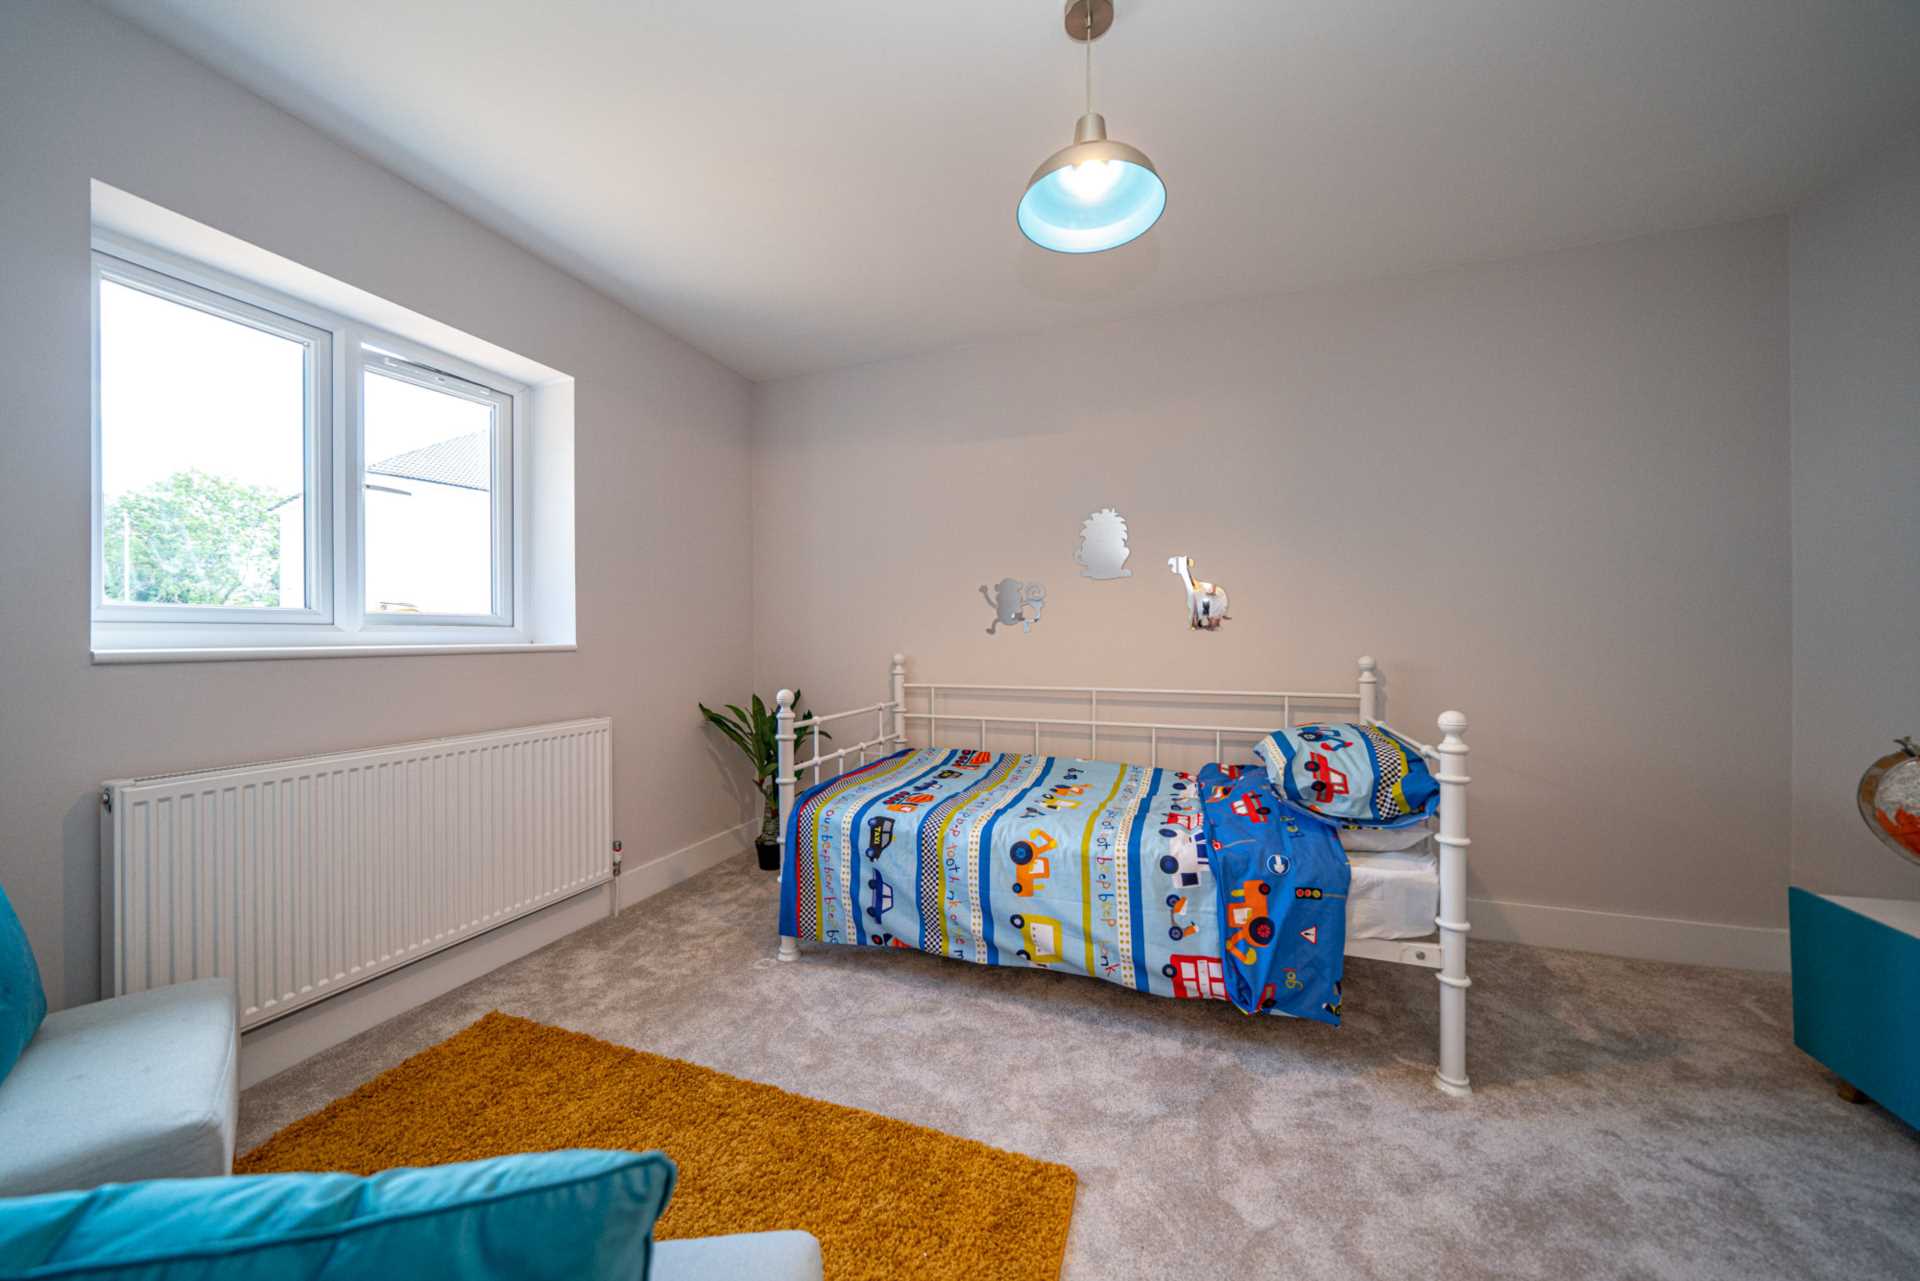 3/4 BED at Savoy Close, Adeyfield, Image 10